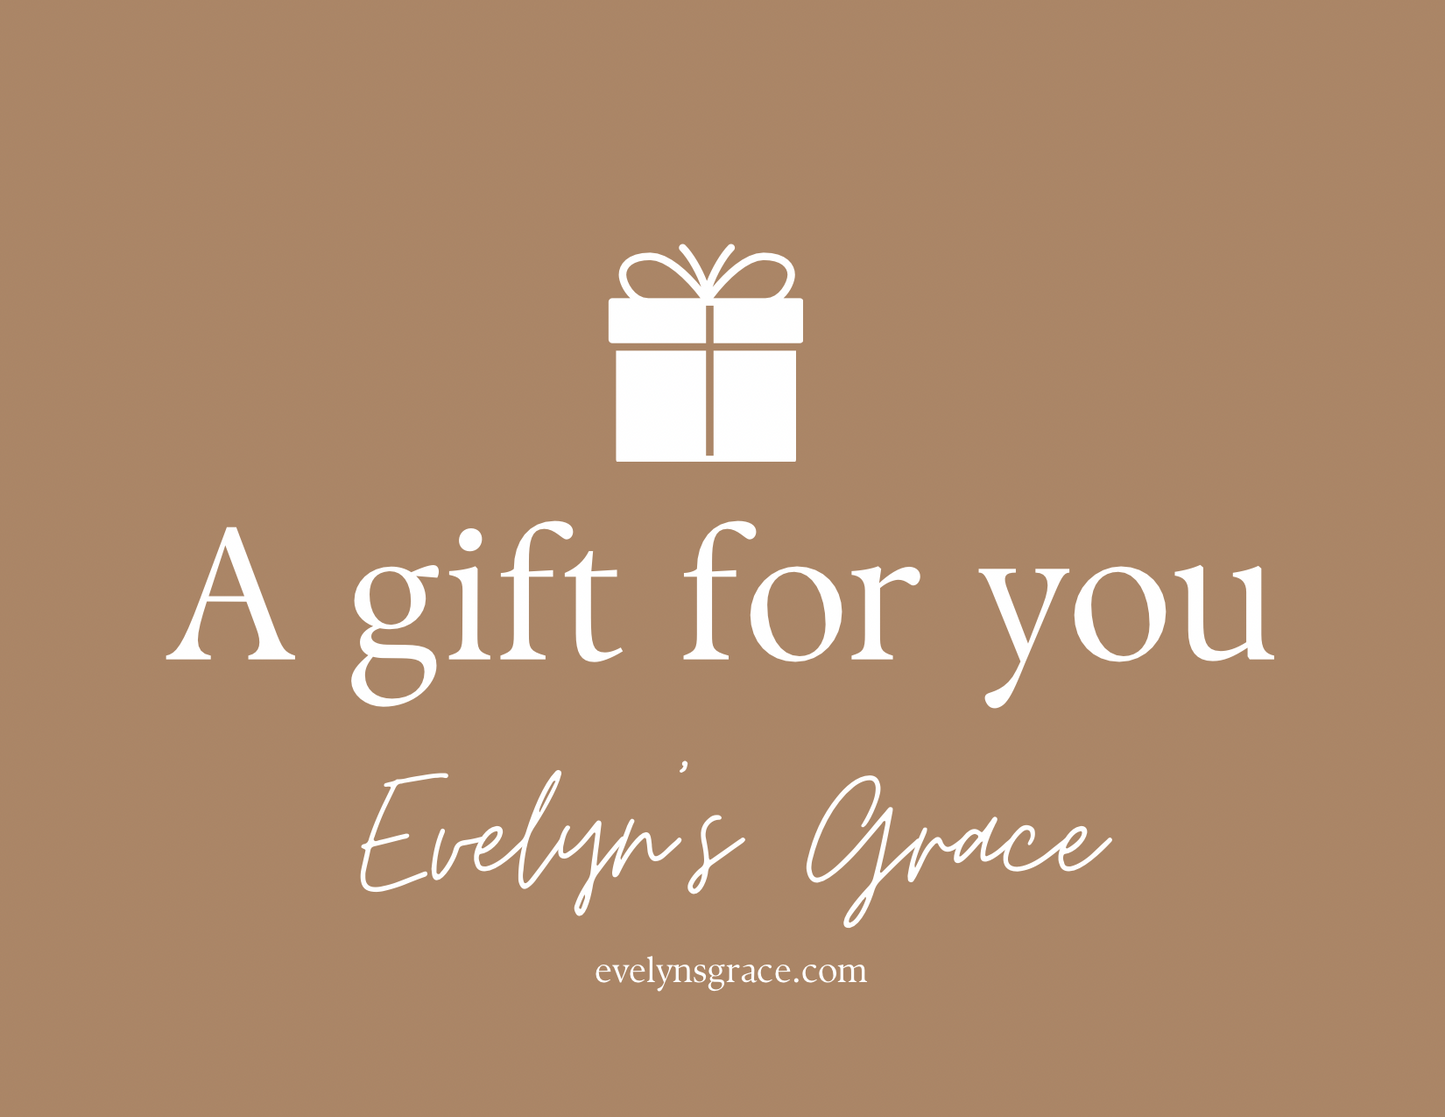 Evelyn's Grace Gift Card